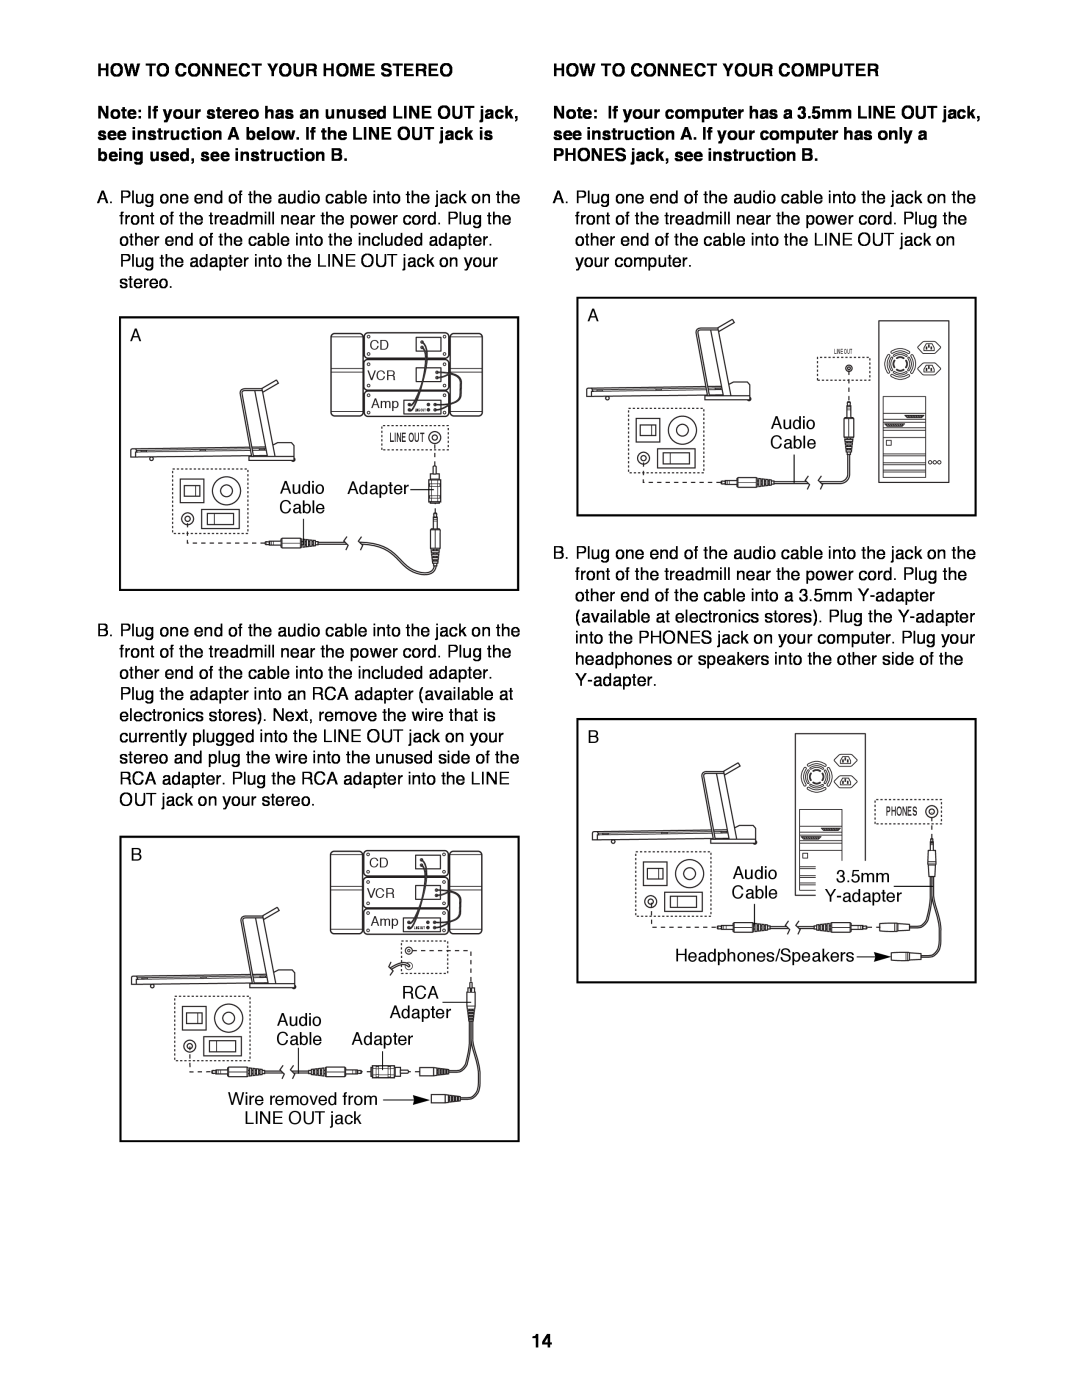 ProForm 785Pi user manual How To Connect Your Home Stereo, How To Connect Your Computer, Line Out 